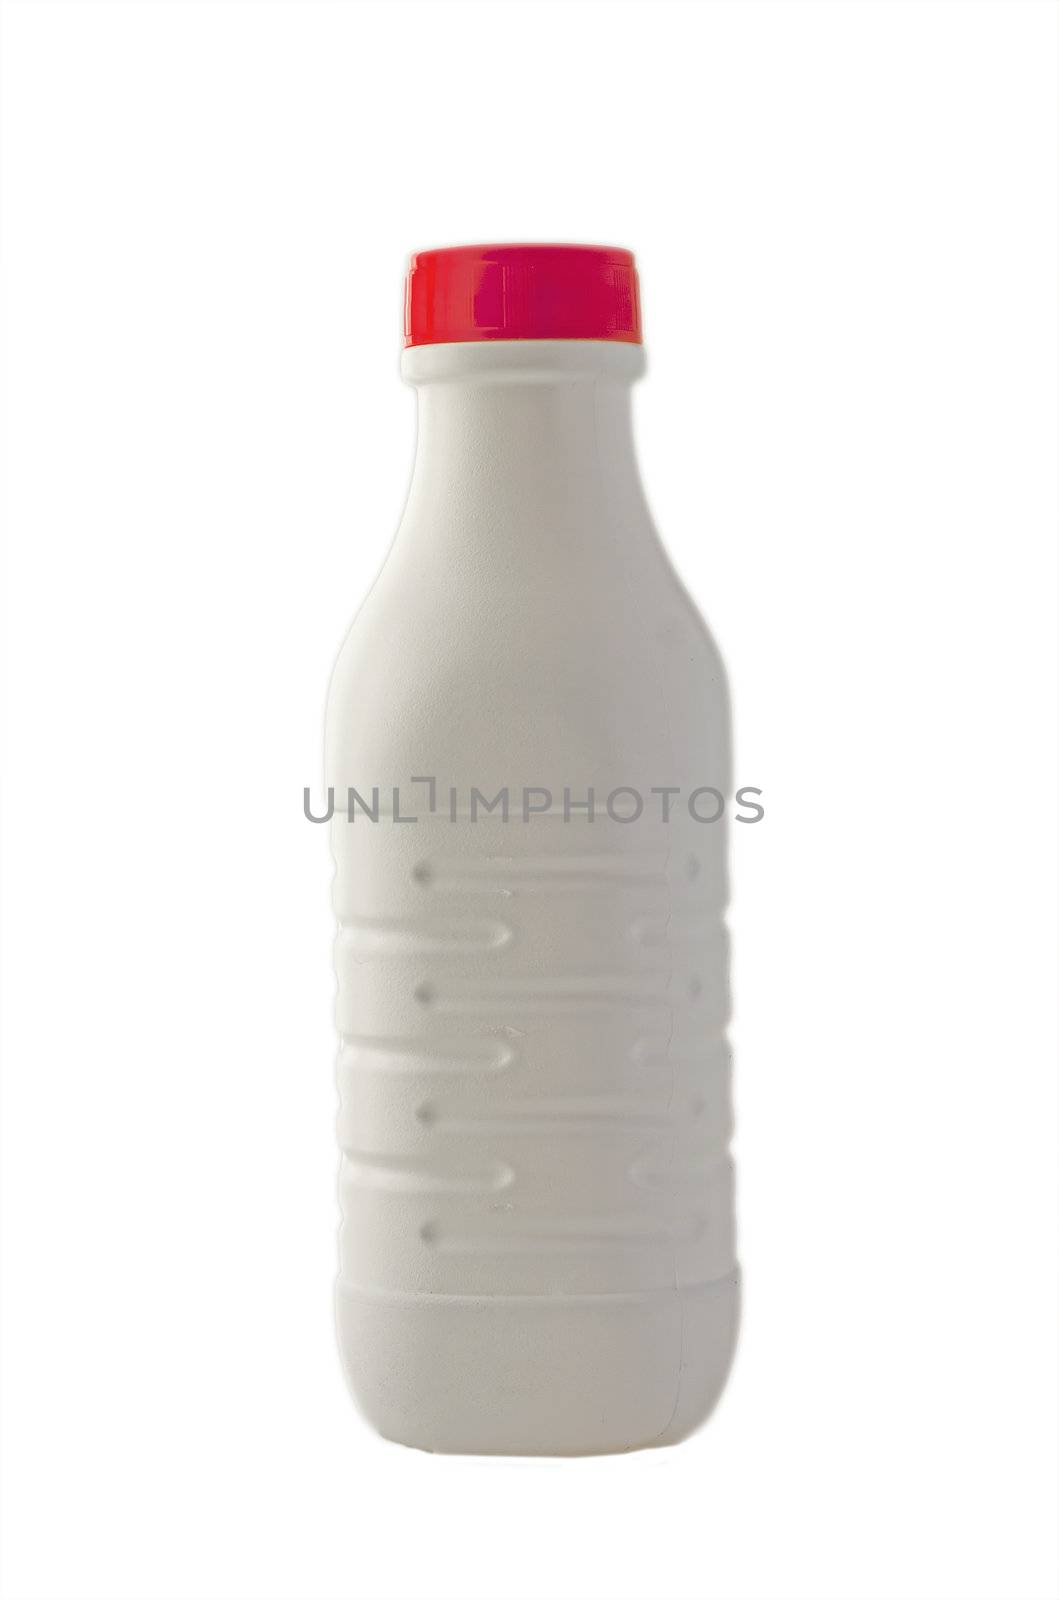 A white bottle with red cap isolated over white